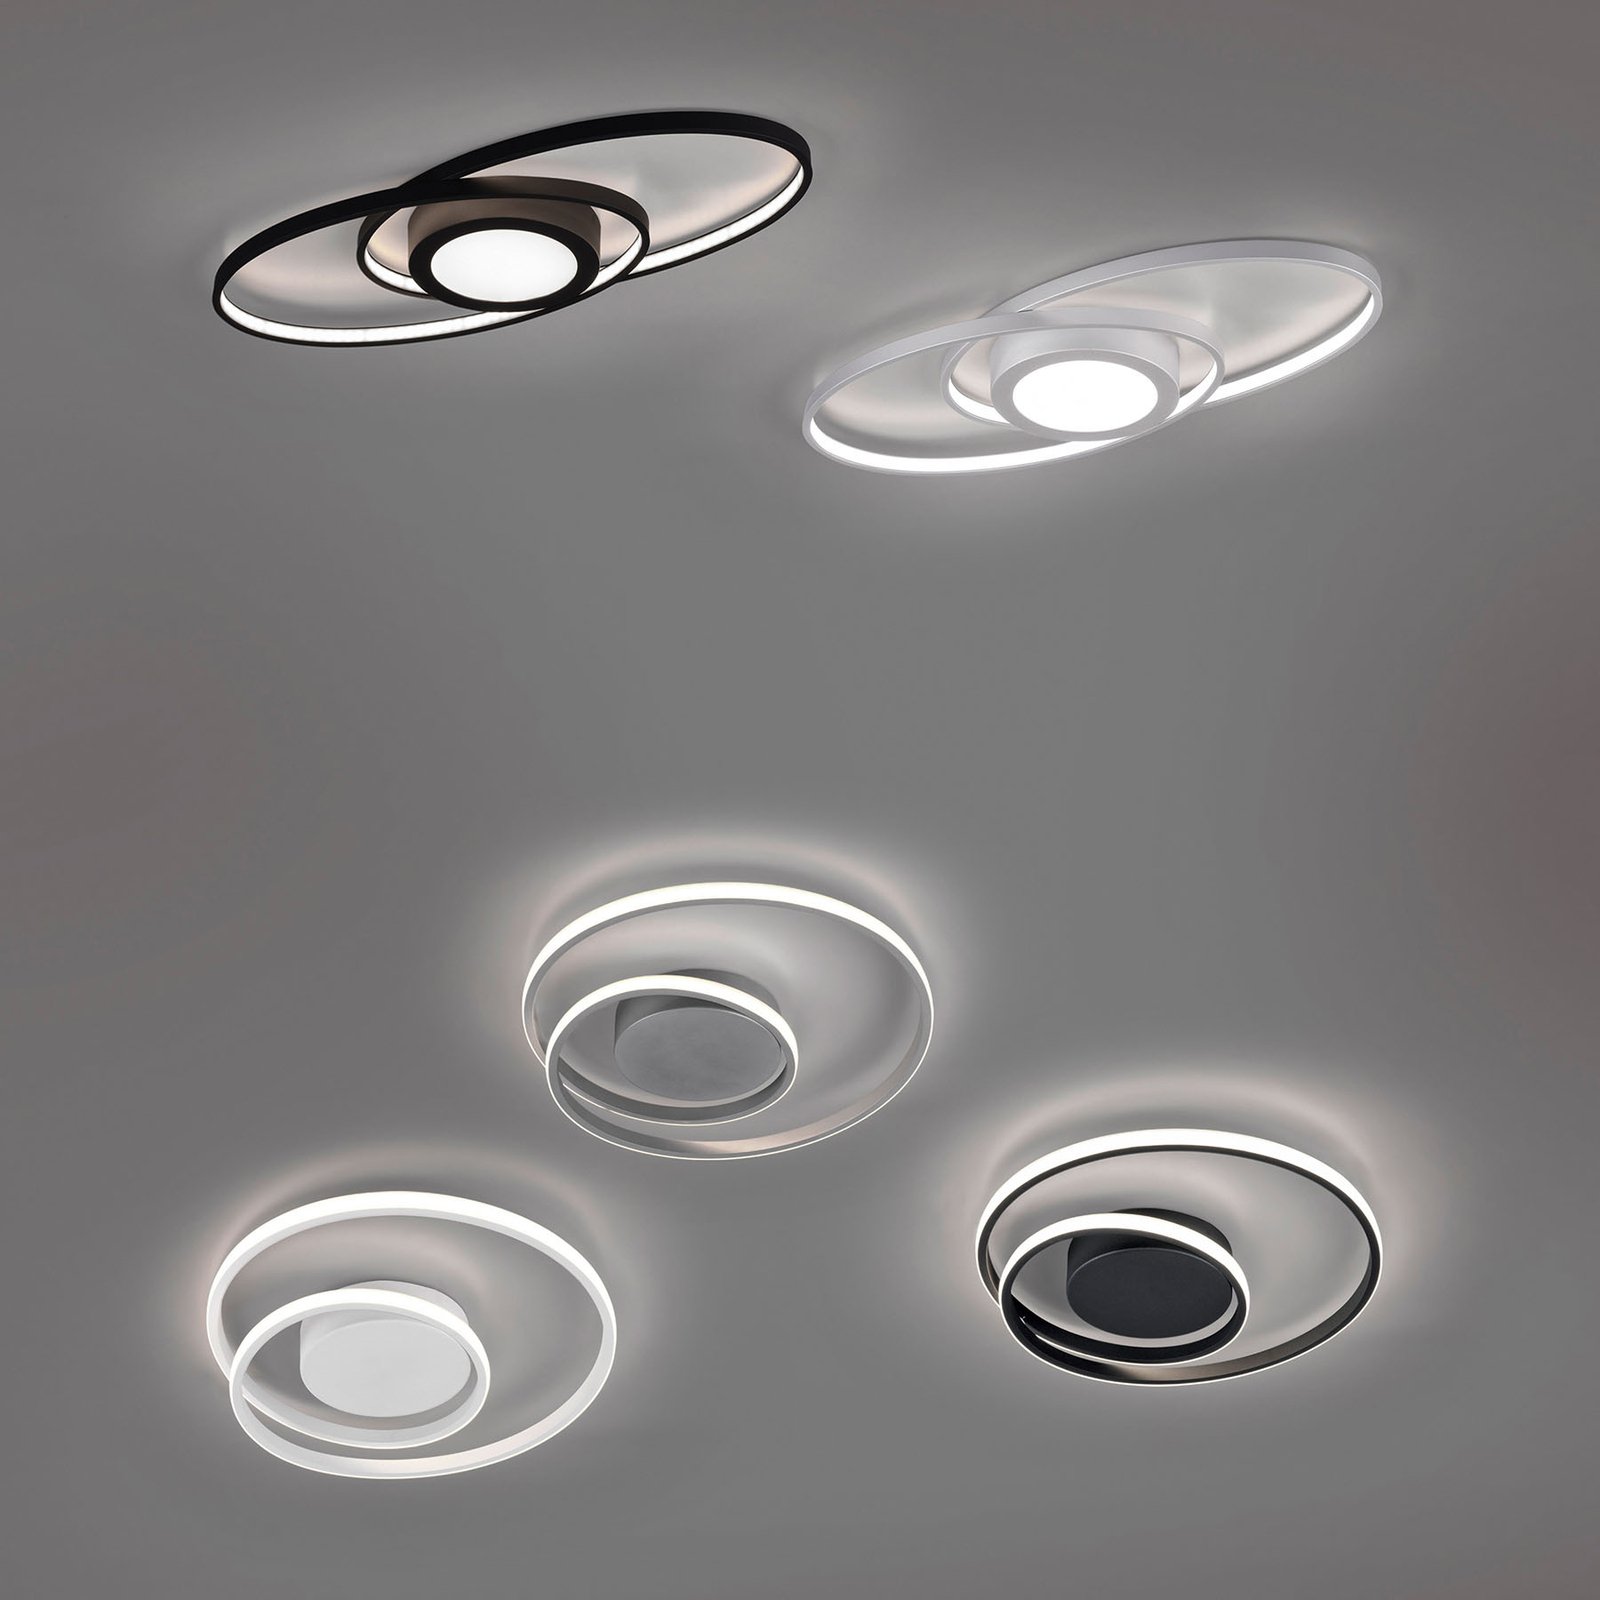 LED ceiling light Galaxy, dimmable, anthracite